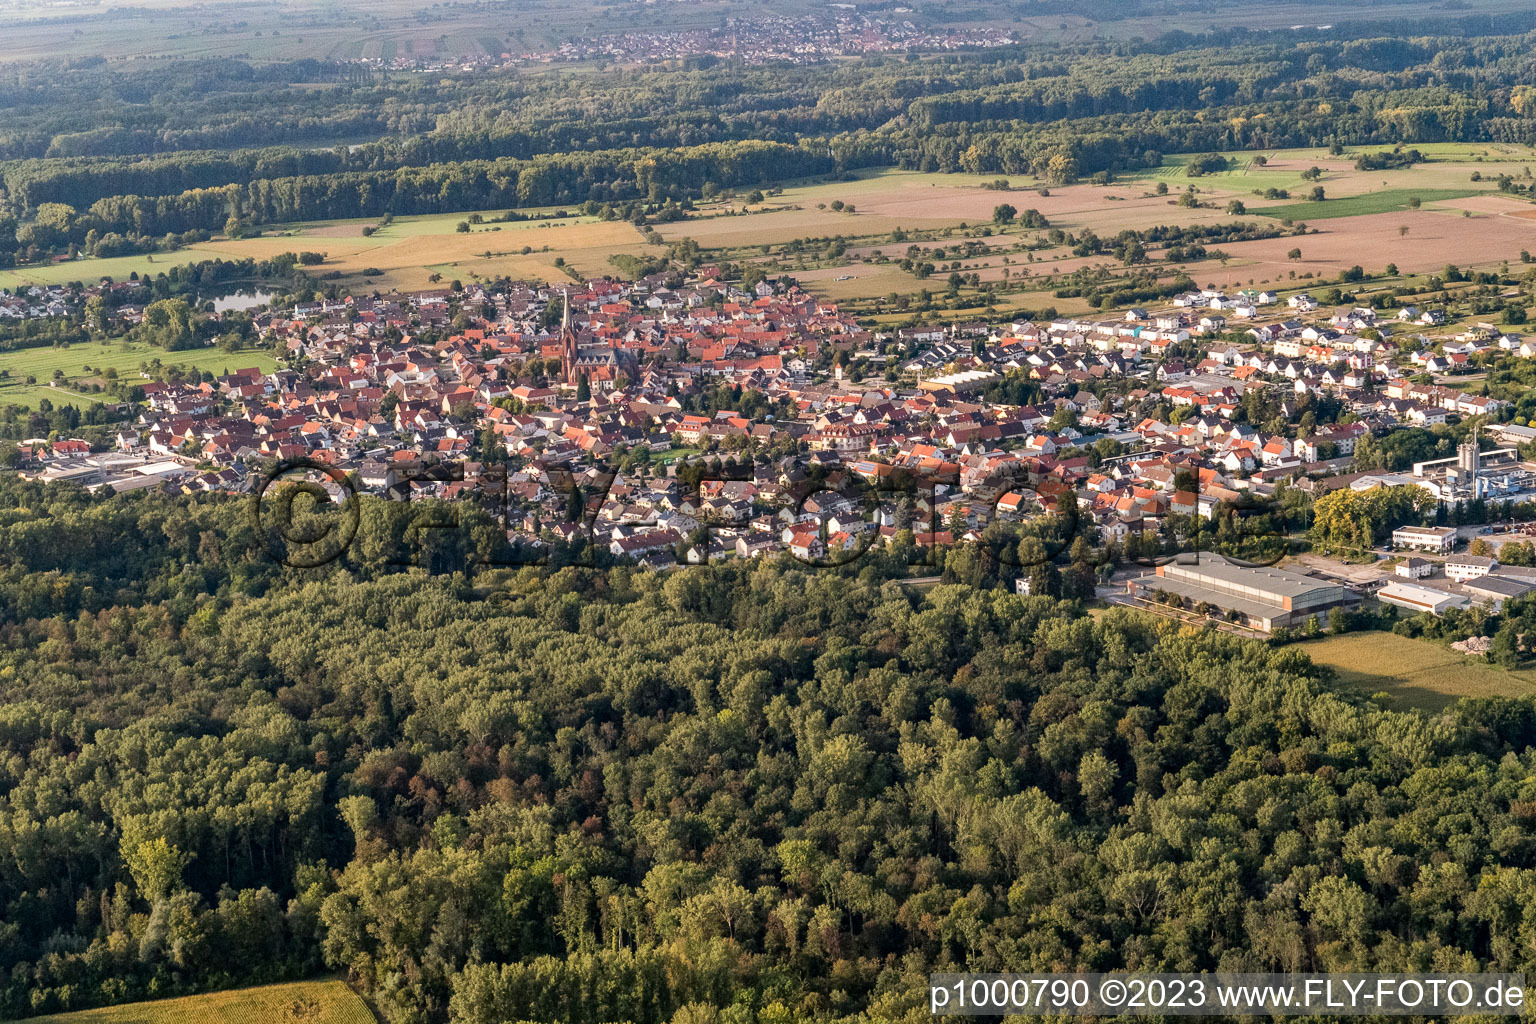 District Rheinsheim in Philippsburg in the state Baden-Wuerttemberg, Germany seen from a drone